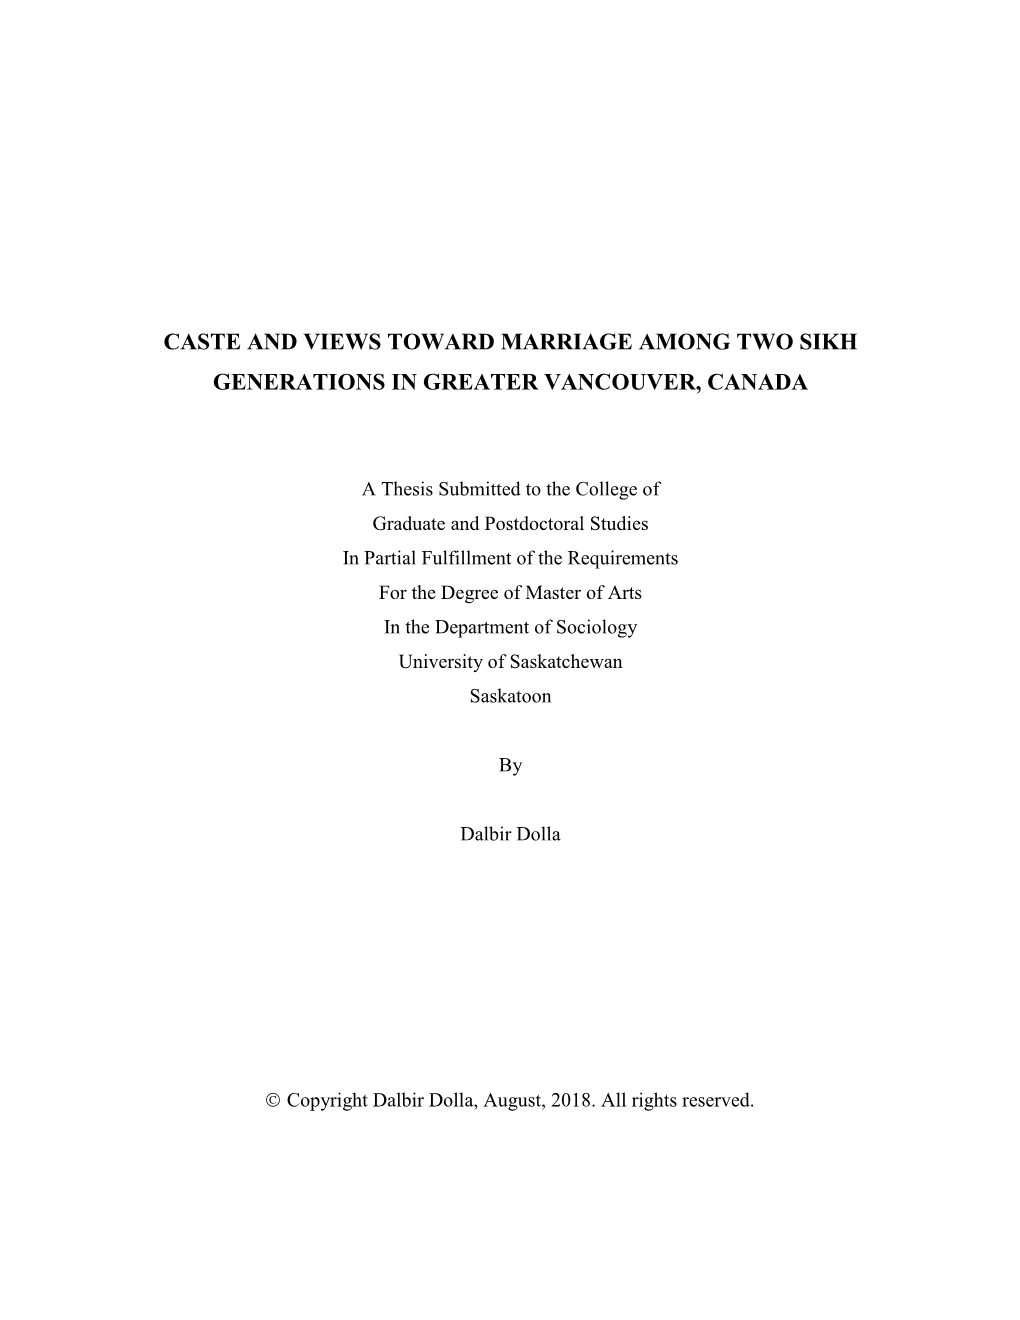 Caste and Views Toward Marriage Among Two Sikh Generations in Greater Vancouver, Canada